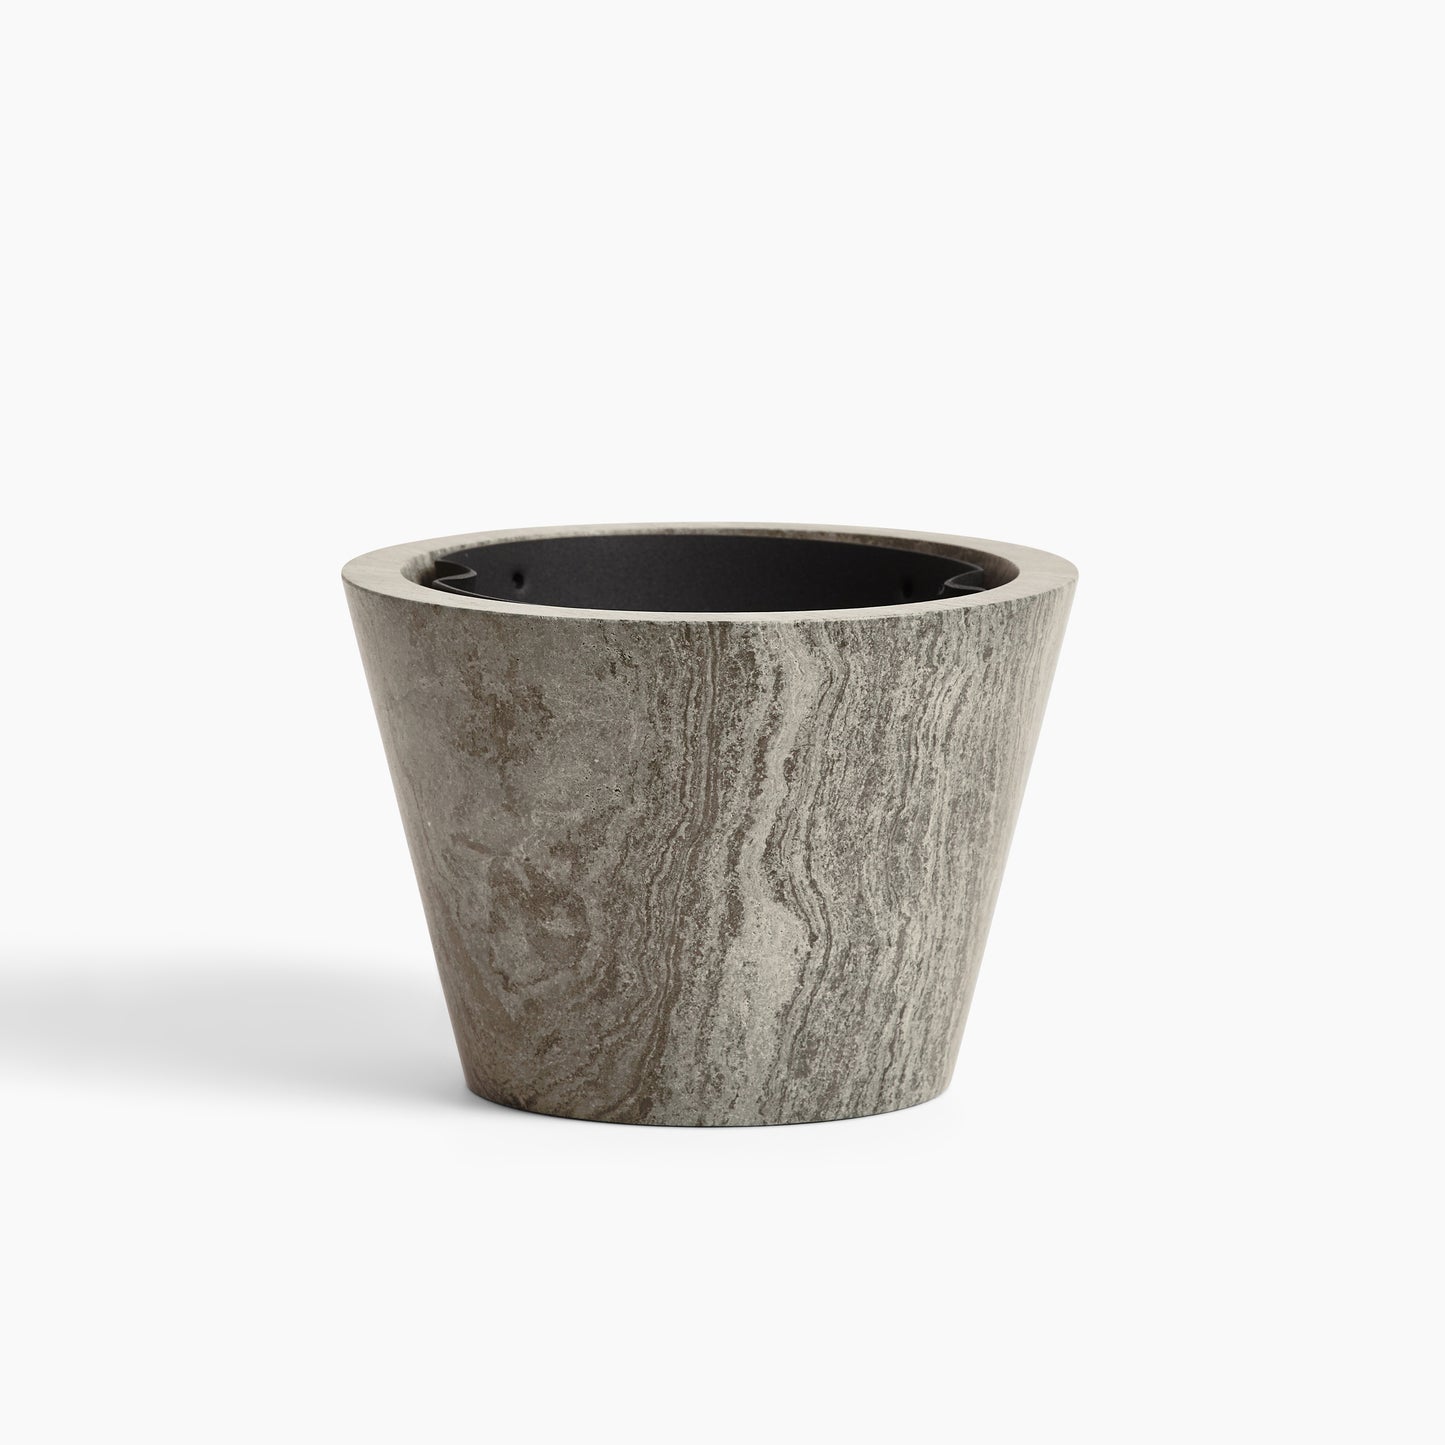 MEDIUM ORCHID POT IN GREY ATHENS MARBLE